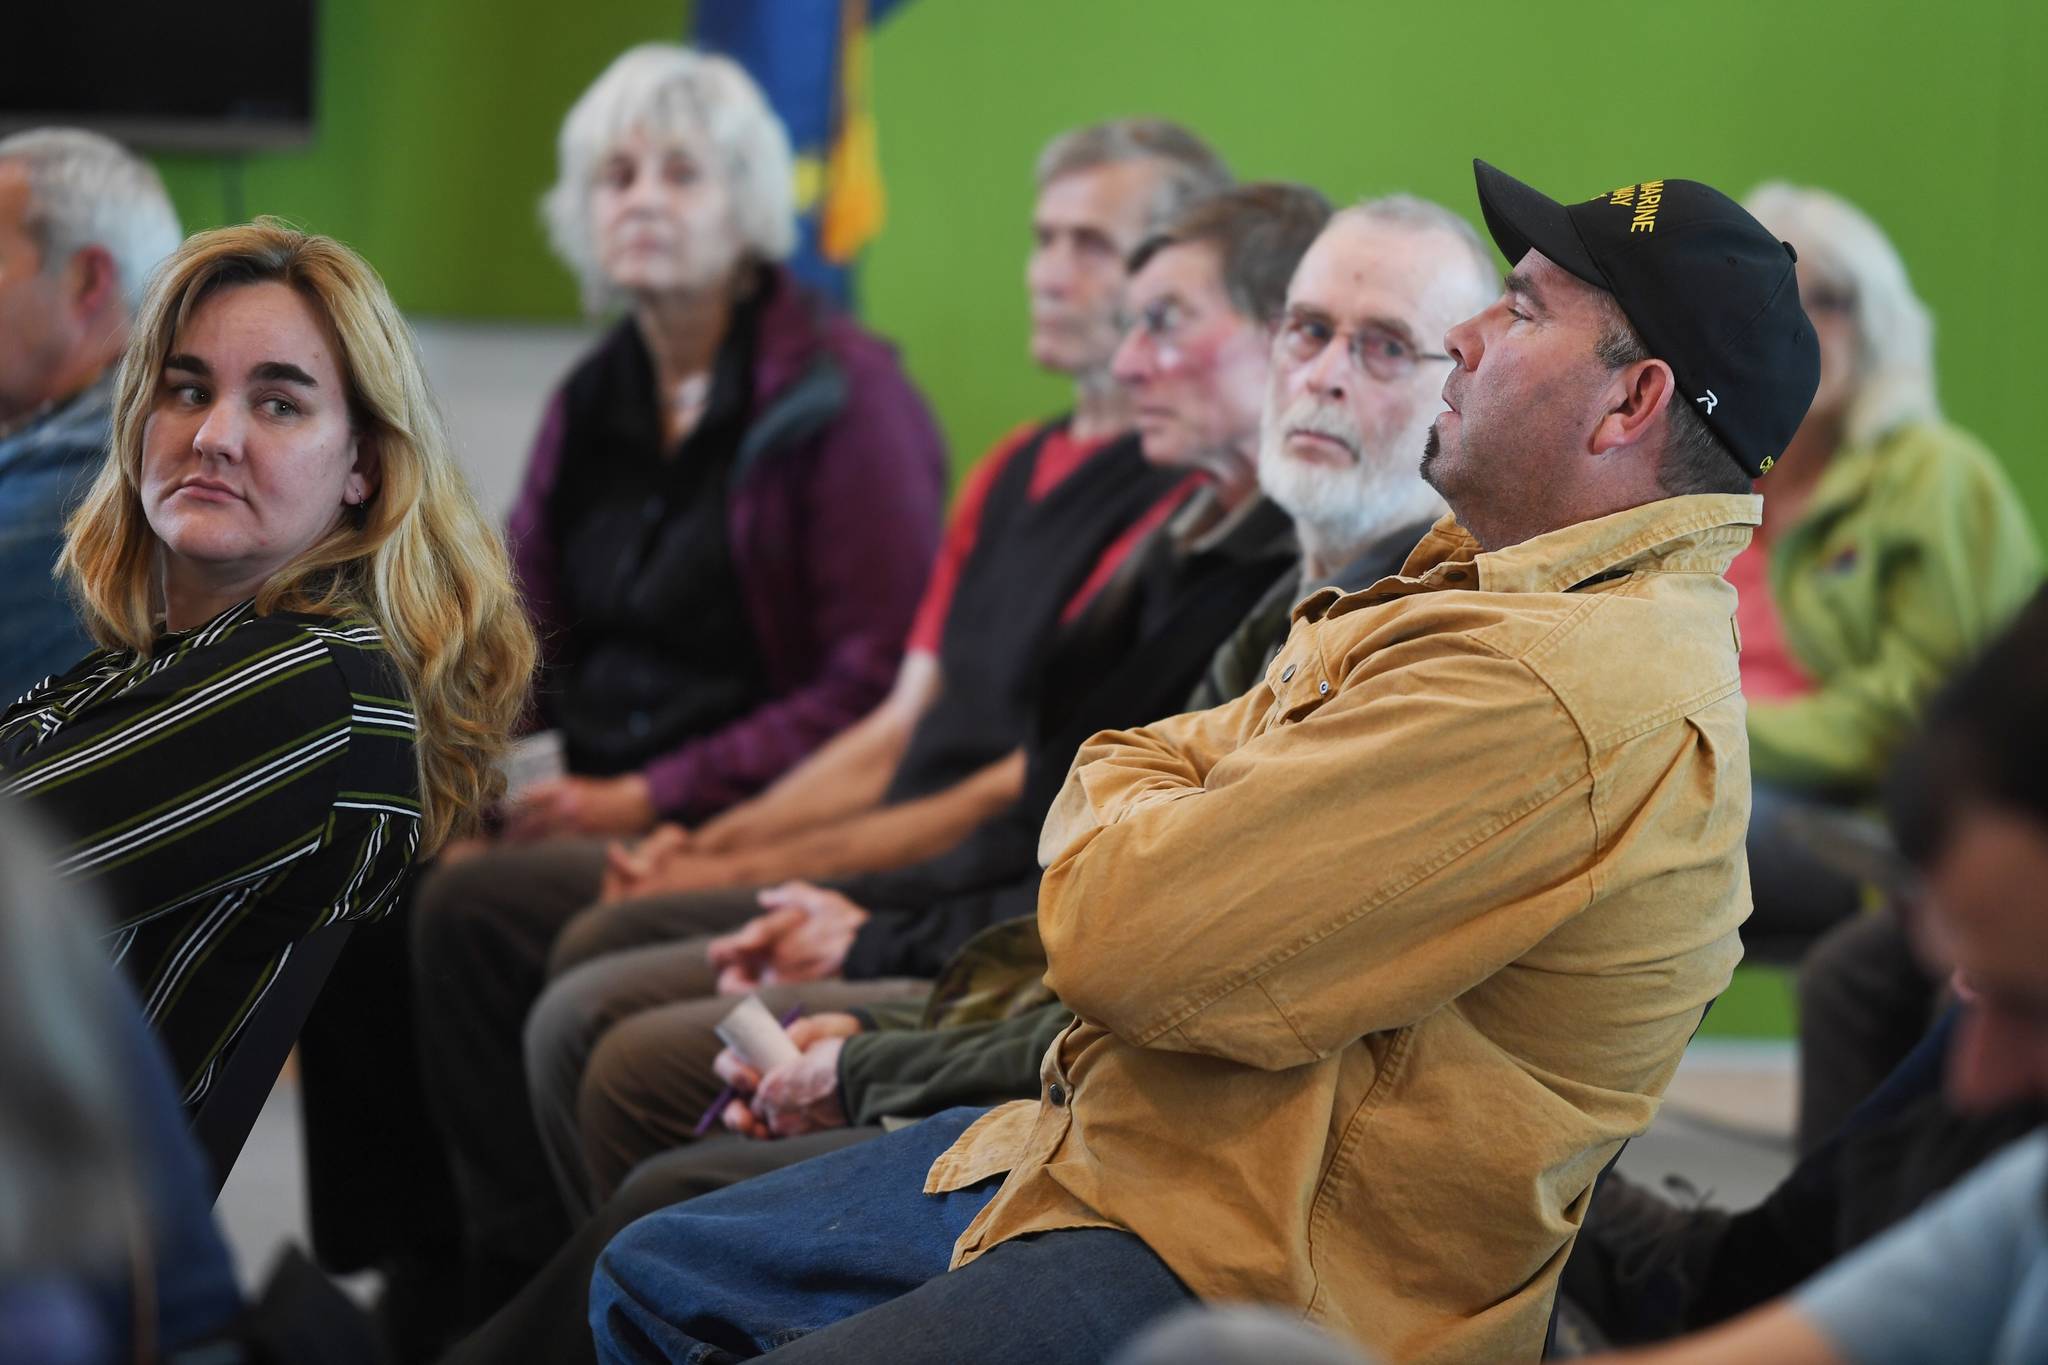 Patrick Phillips speaks during Rep. Andi Story’s town hall meeting at the Mendenhall Valley Public Library on Wednesday, June 19, 2019. (Michael Penn | Juneau Empire)